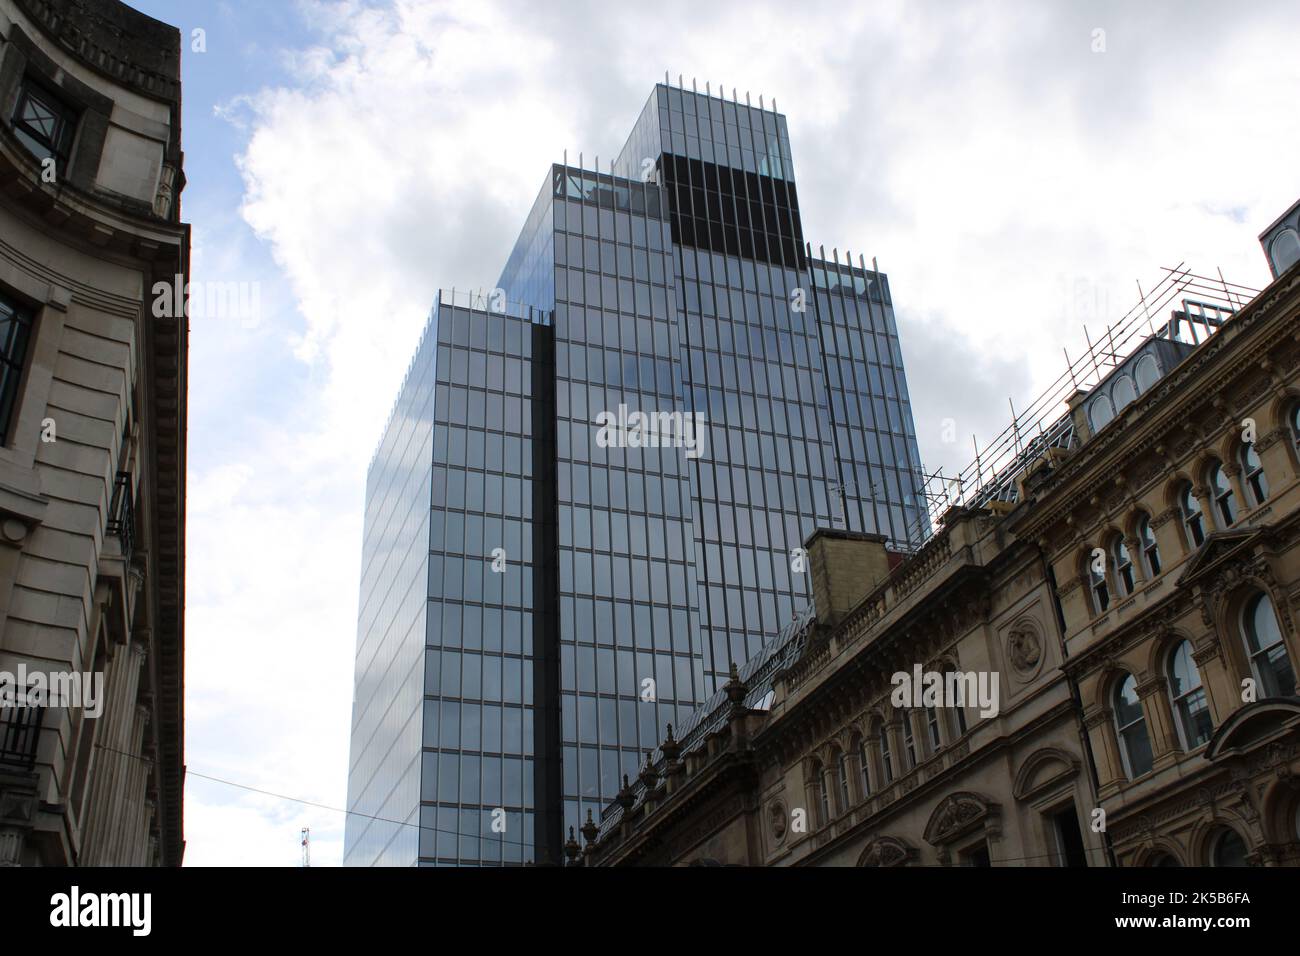 A beautiful view of 103 Colmore Row skyscraper in Birmingham, England. Stock Photo